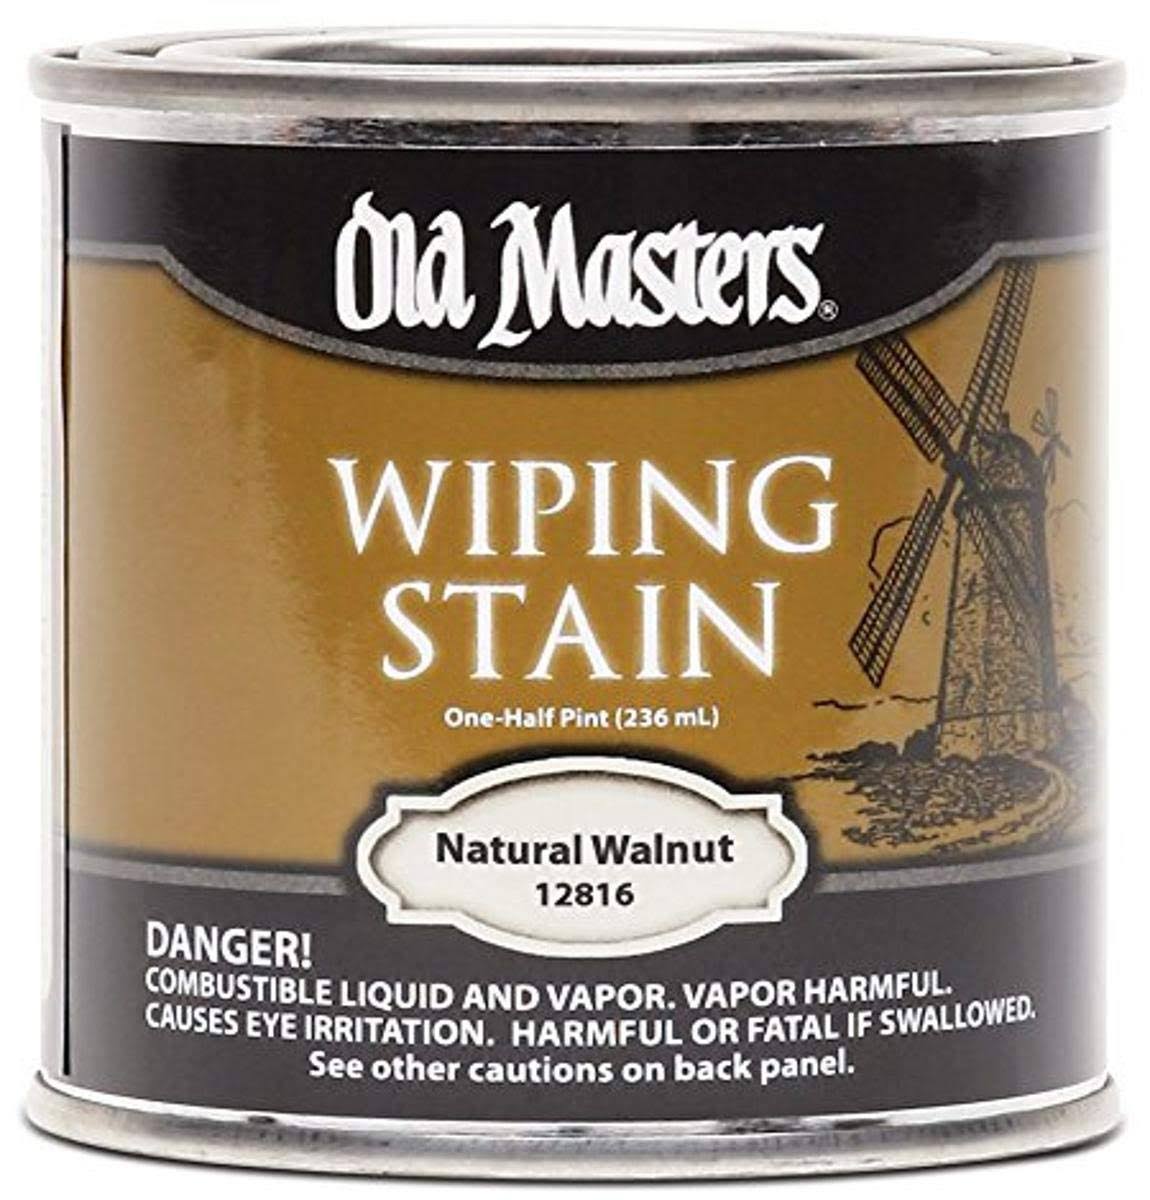 Old Masters Wiping Stain - Natural Walnut